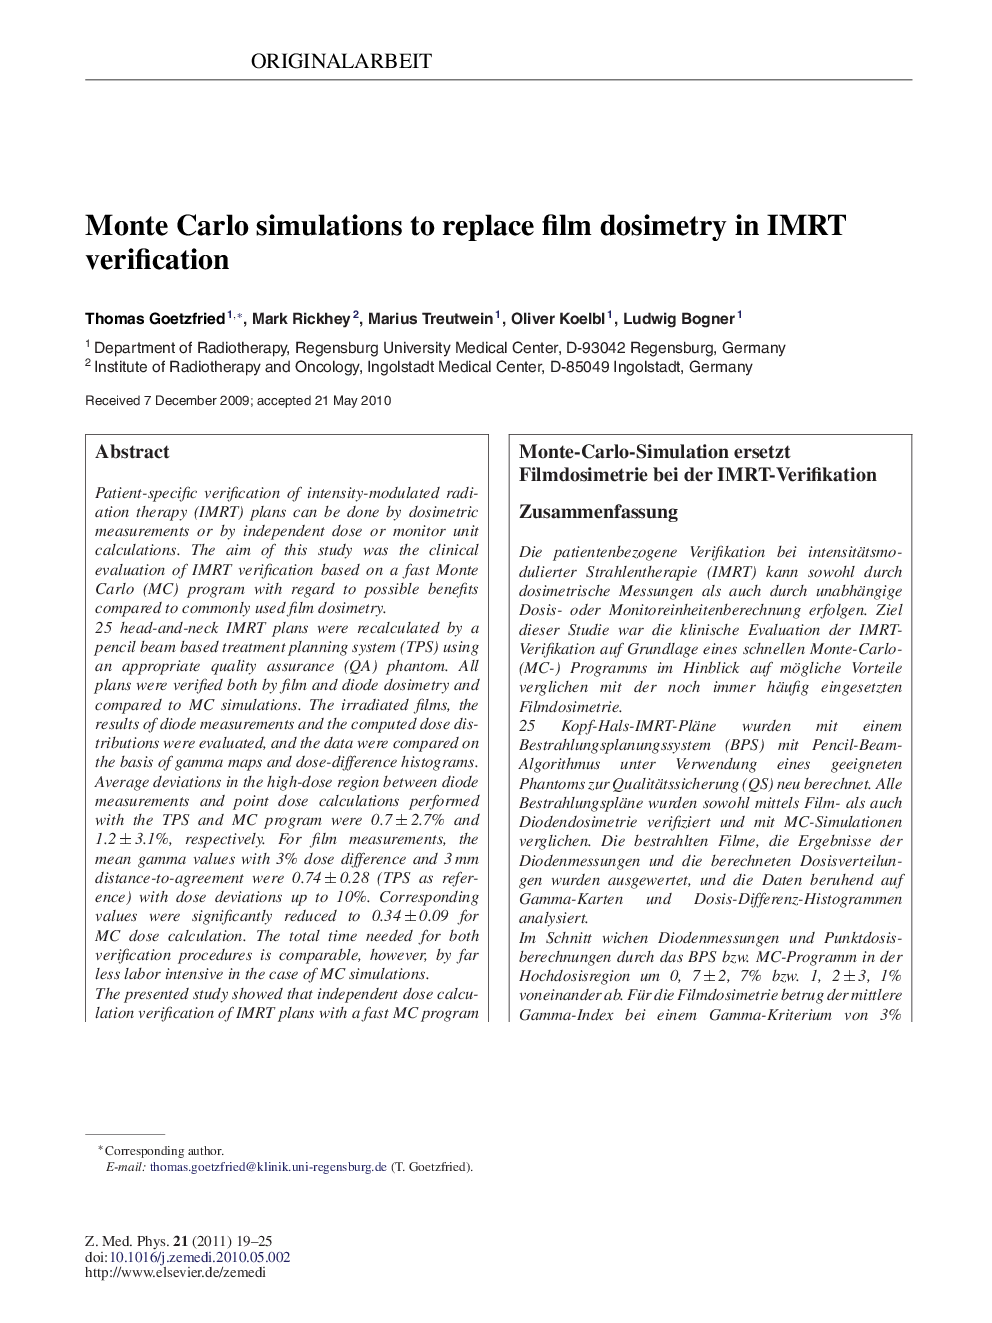 Monte Carlo simulations to replace film dosimetry in IMRT verification